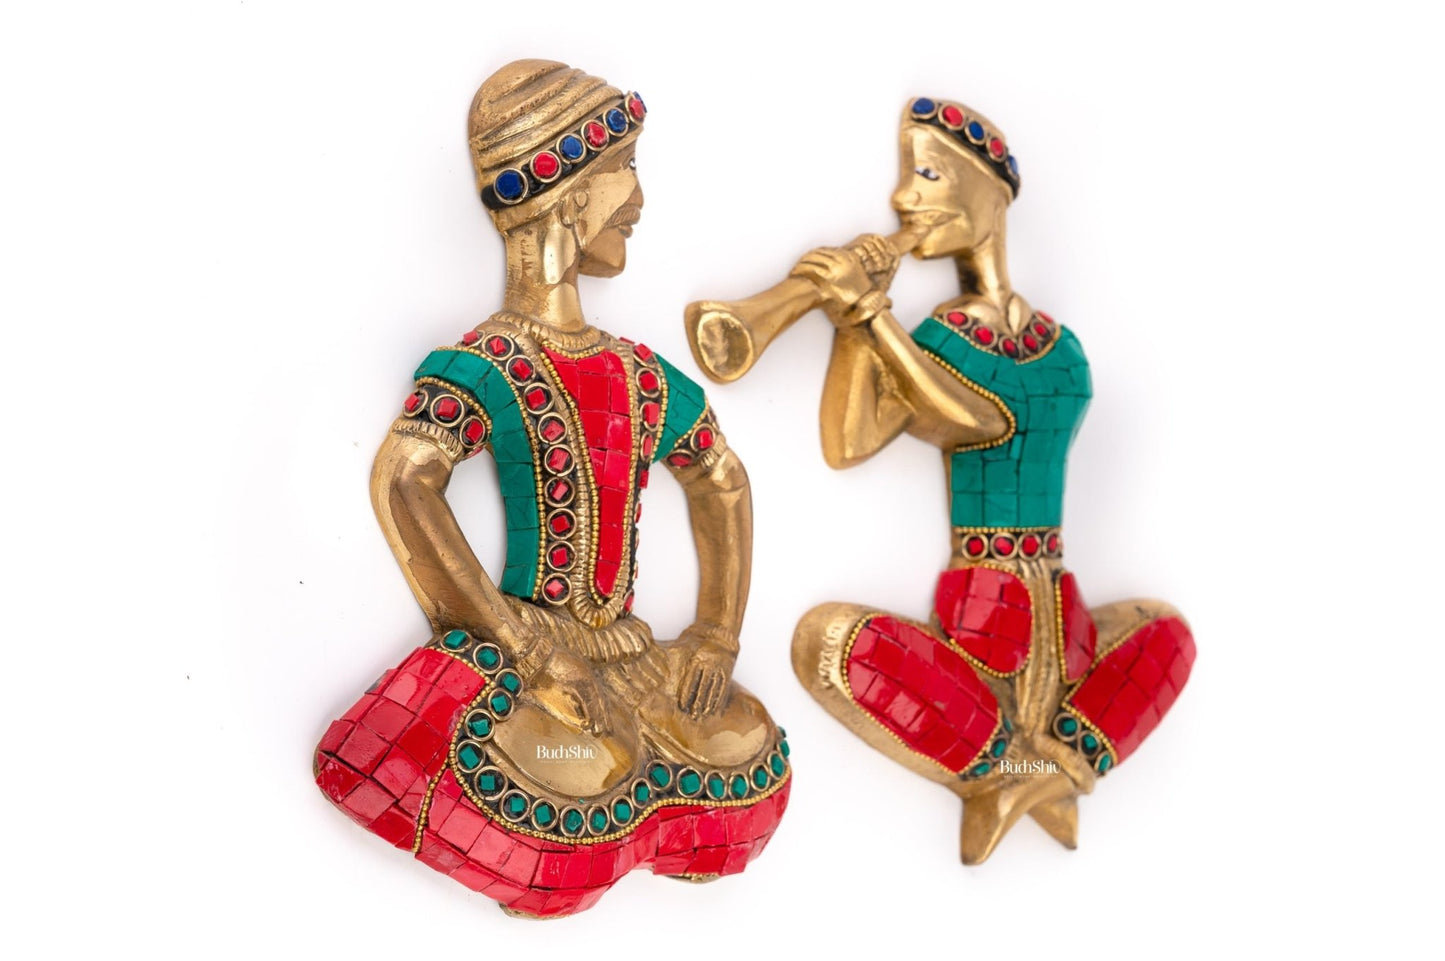 Handmade Hanging Musicians Set with Unique Coloured Stonework | in Pure Brass - Set of 2 - Wall Decor for Home, Office or Gift - Budhshiv.com